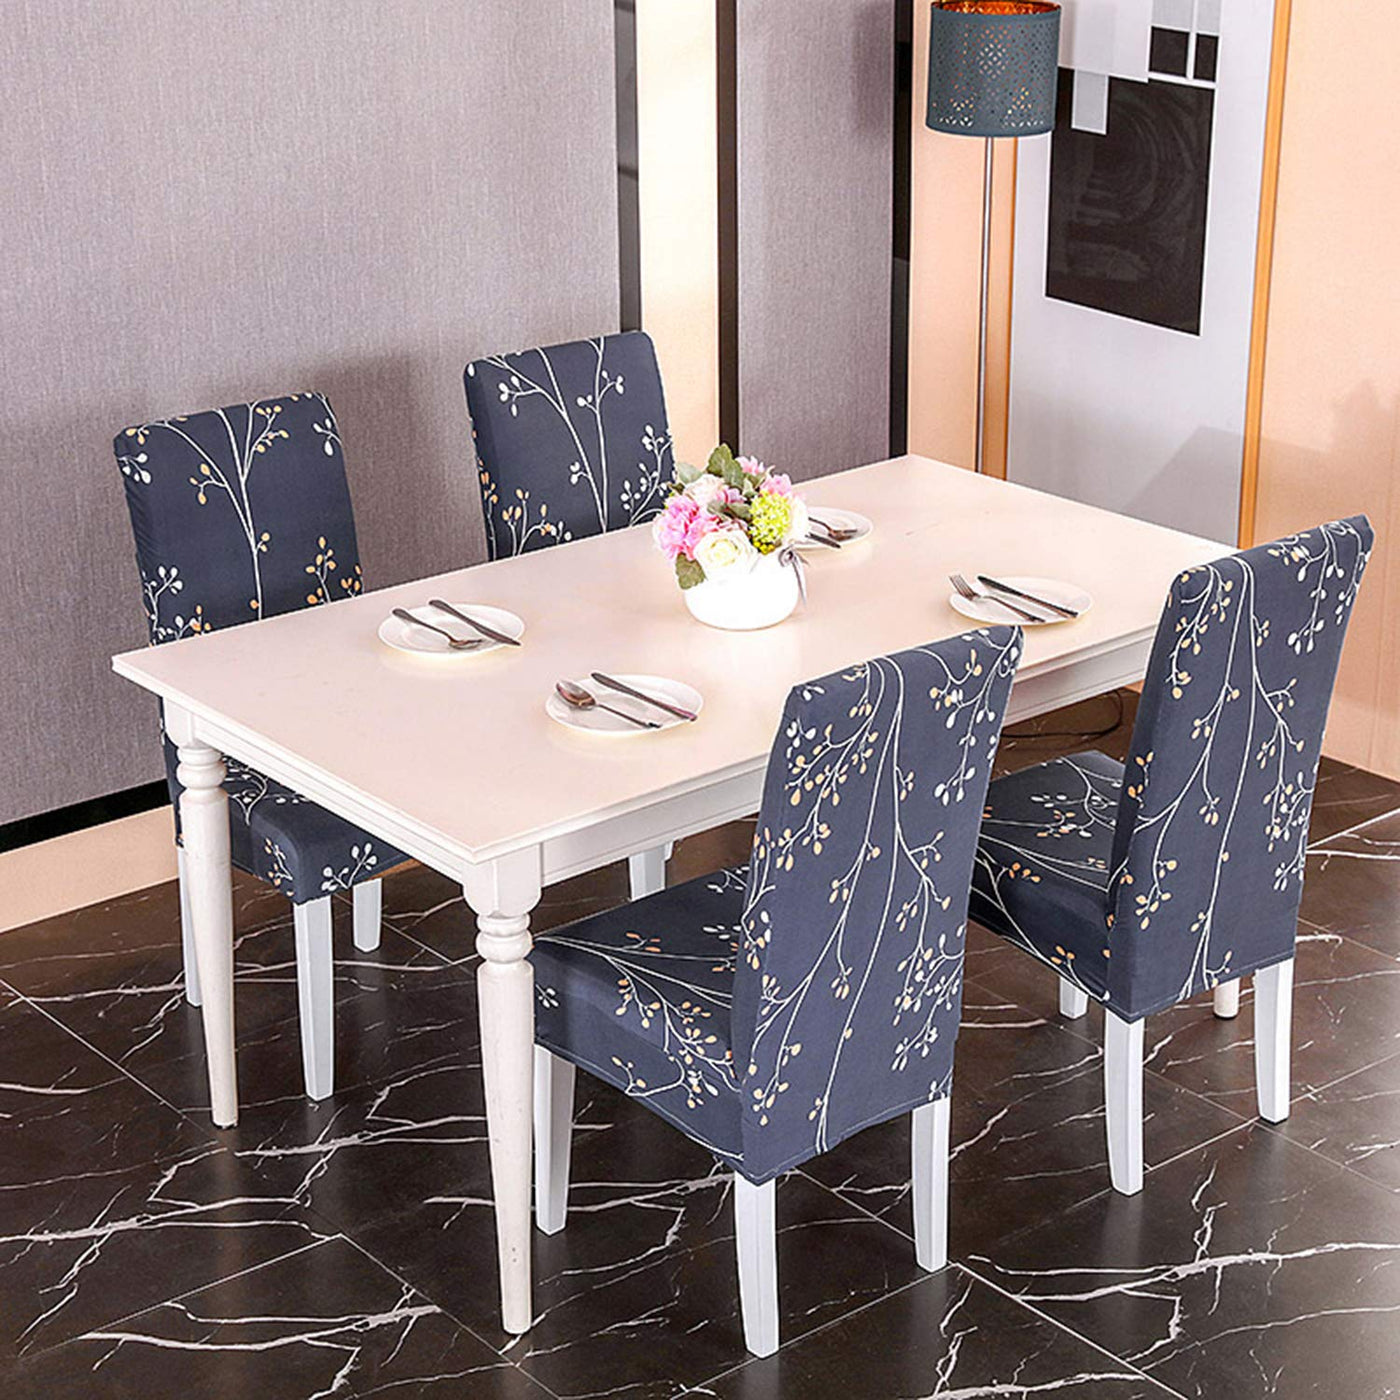 Premium Chair Cover - Stretchable & Elastic Fitted Great Happy IN Midnight Branch 2 PCS - ₹799 